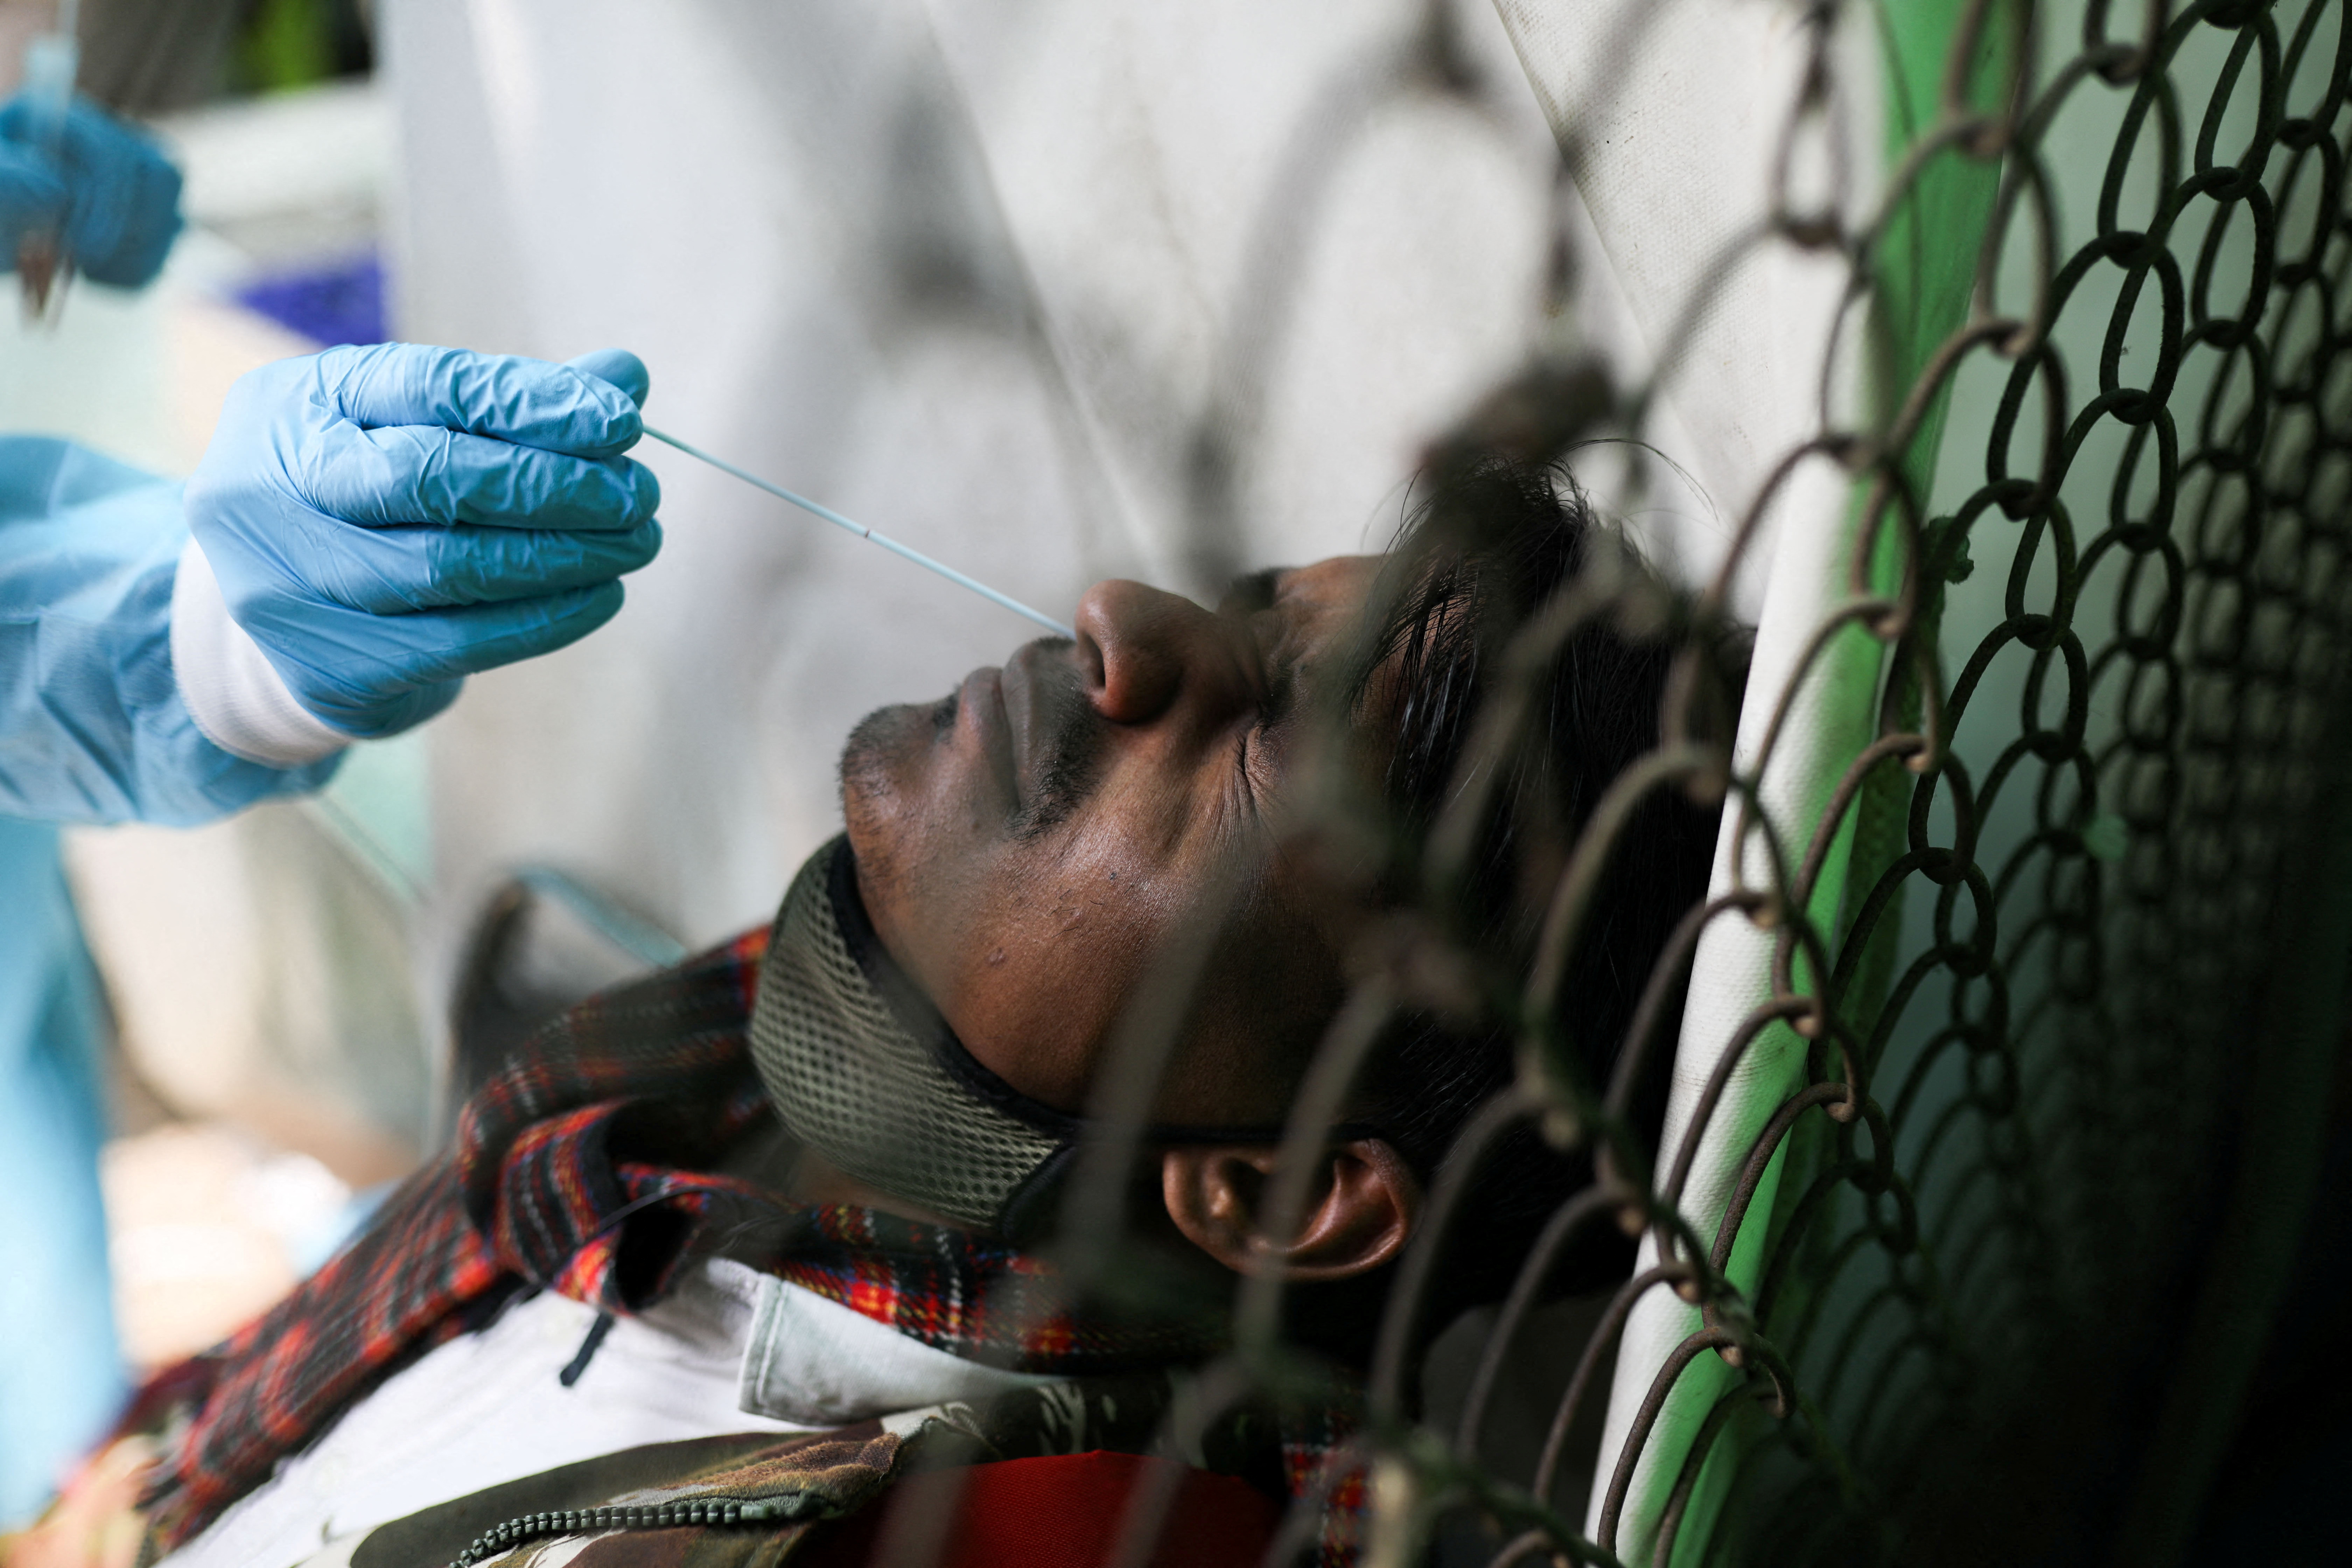 A healthcare worker collects a COVID-19 test swab sample from a man in New Delhi